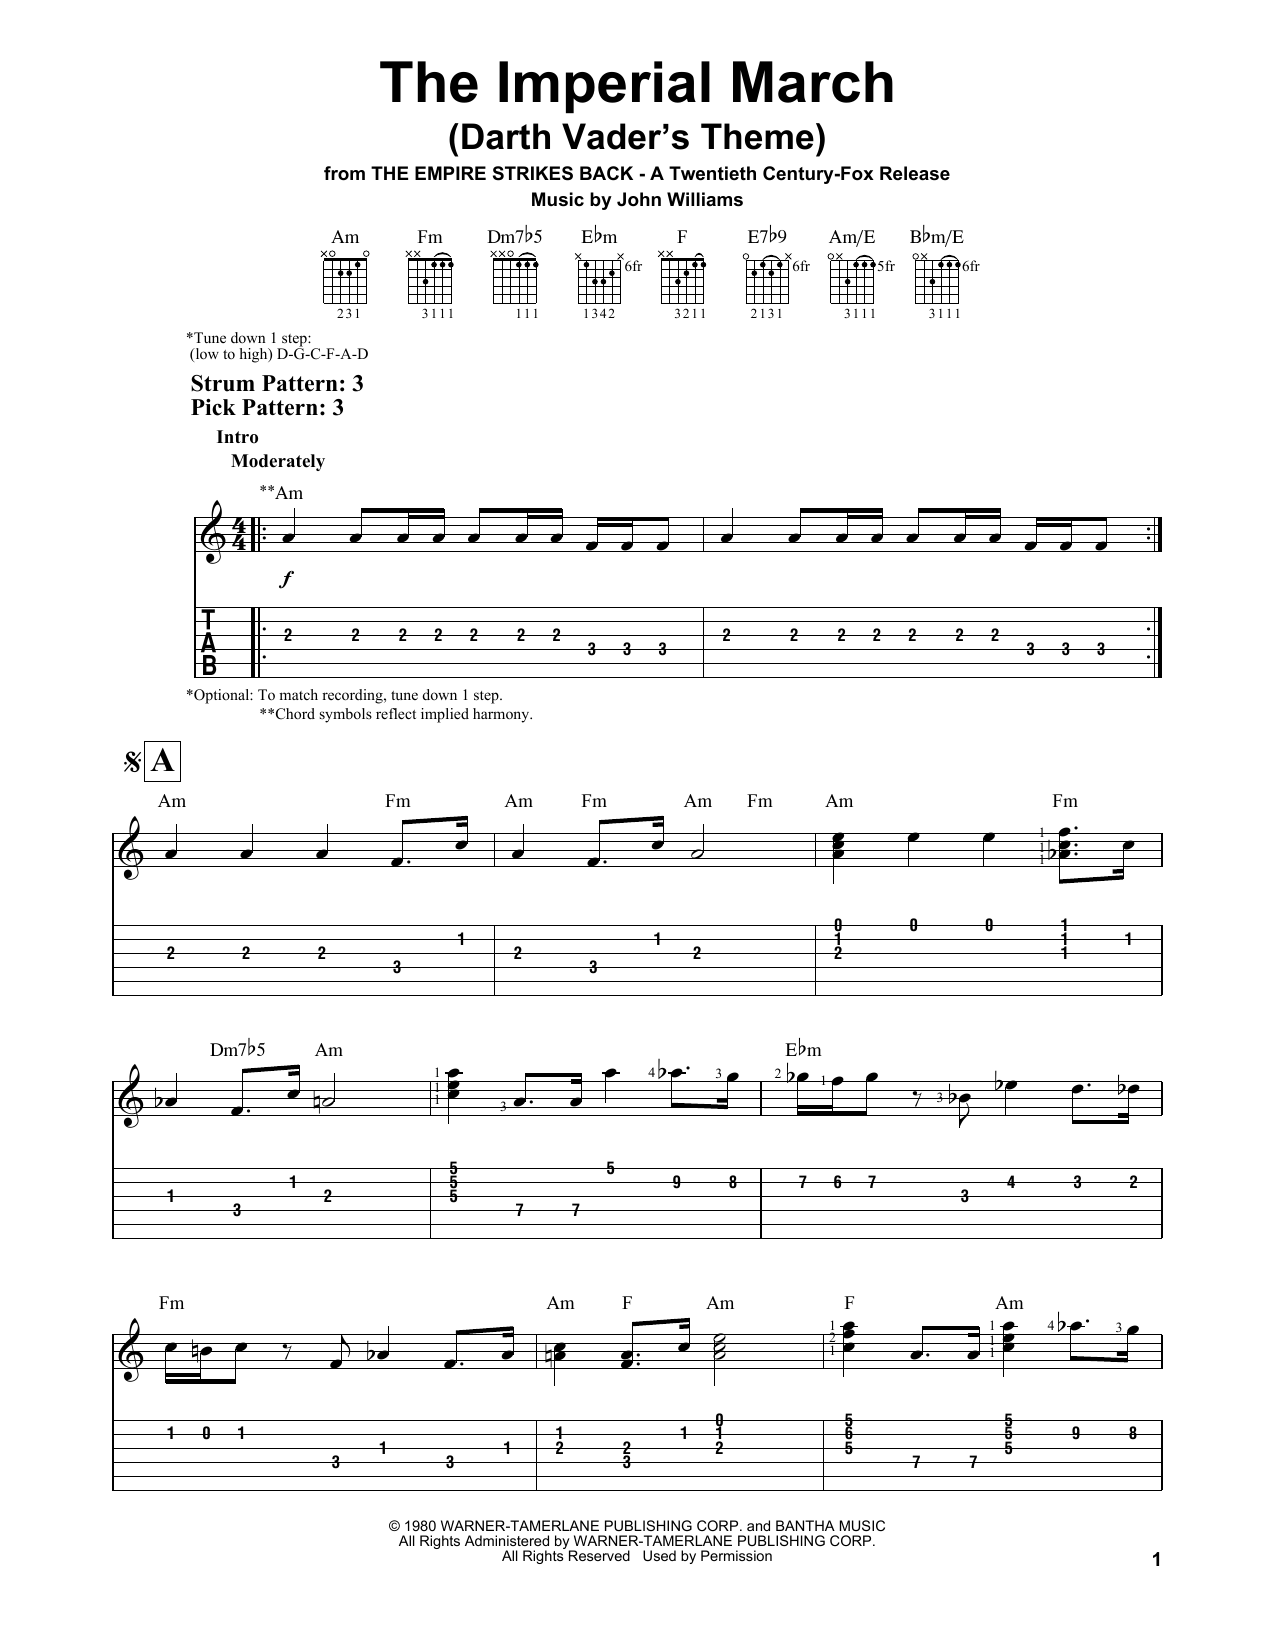 Imperial March (Darth Vader's Theme), sheet music, piano notes, score,...